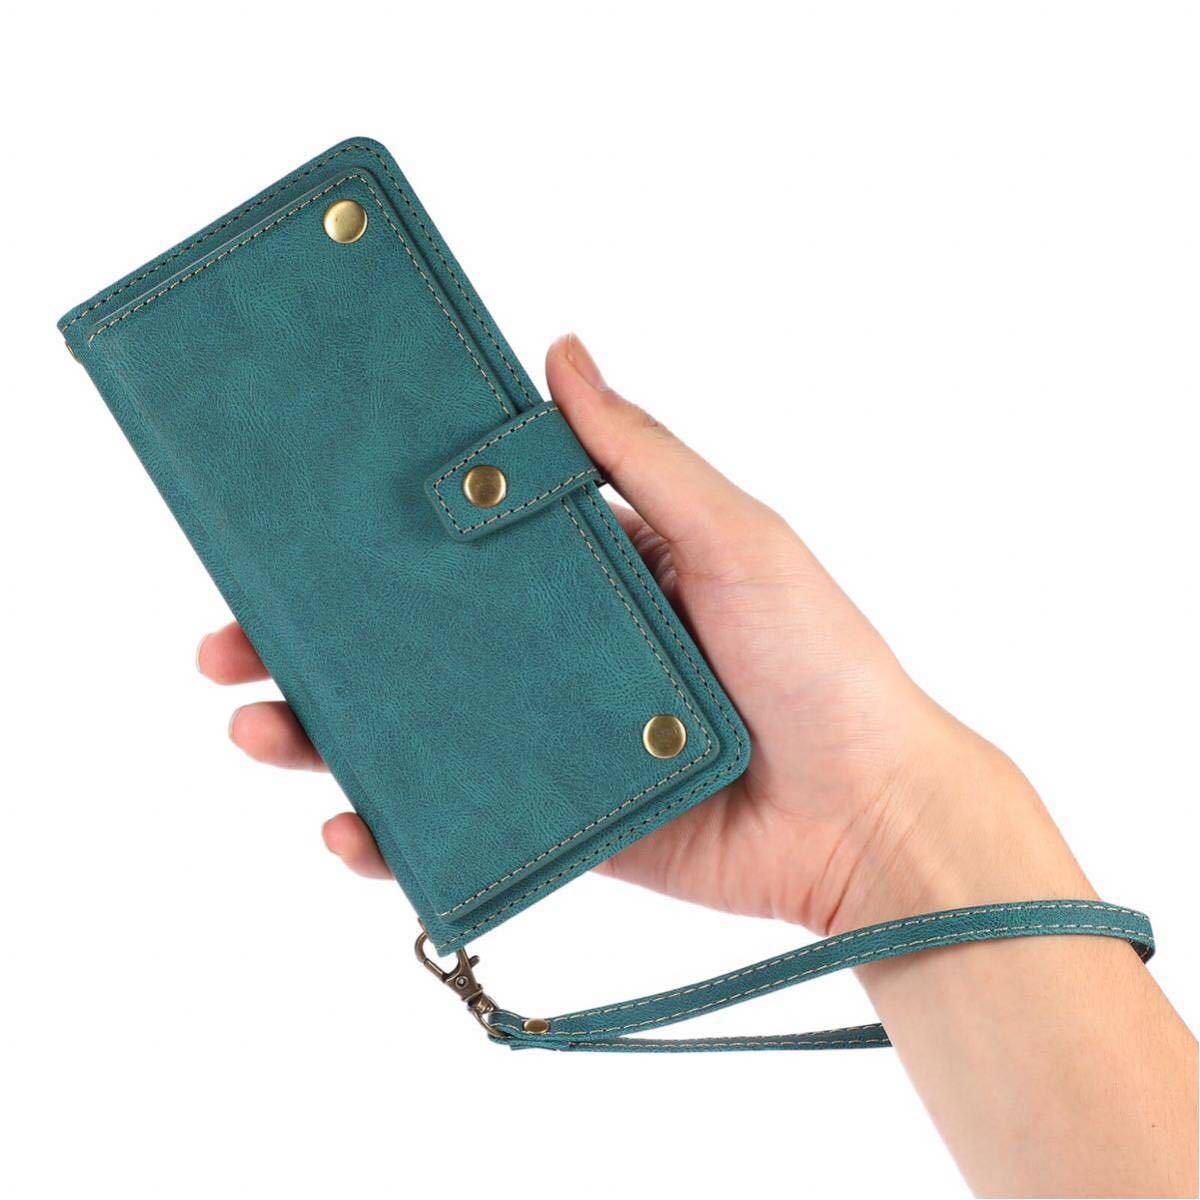 iphone6 leather case iPhone 6s shoulder case iPhone 6/6s shoulder case notebook type card storage with strap .G